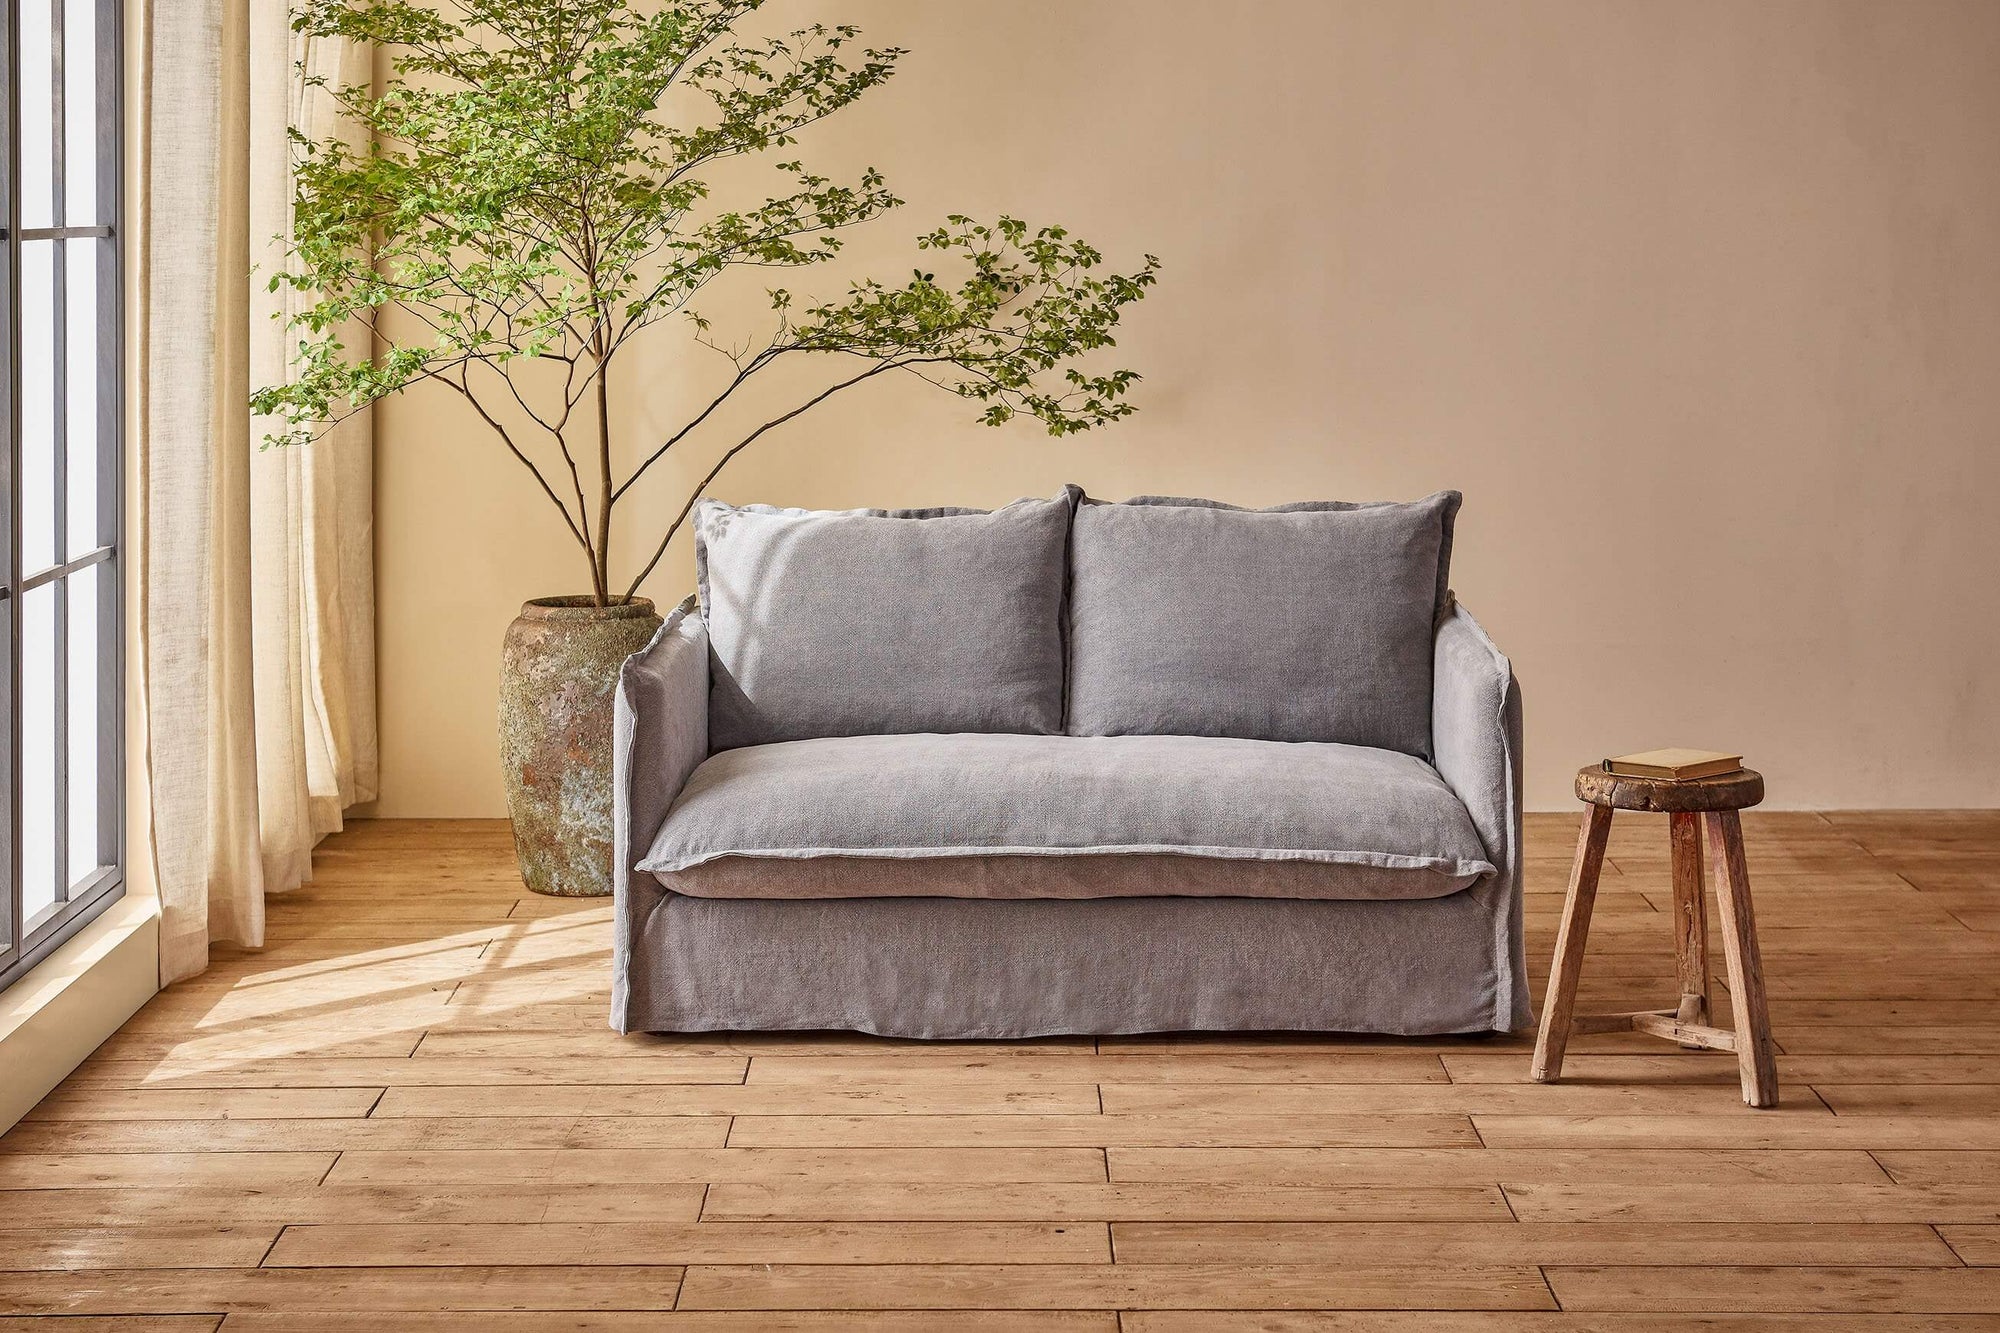 Neva 62" Loveseat in Ink Cap, a medium cool grey Light Weight Linen, placed in a sunlit room with a potted tree and a book on a stool